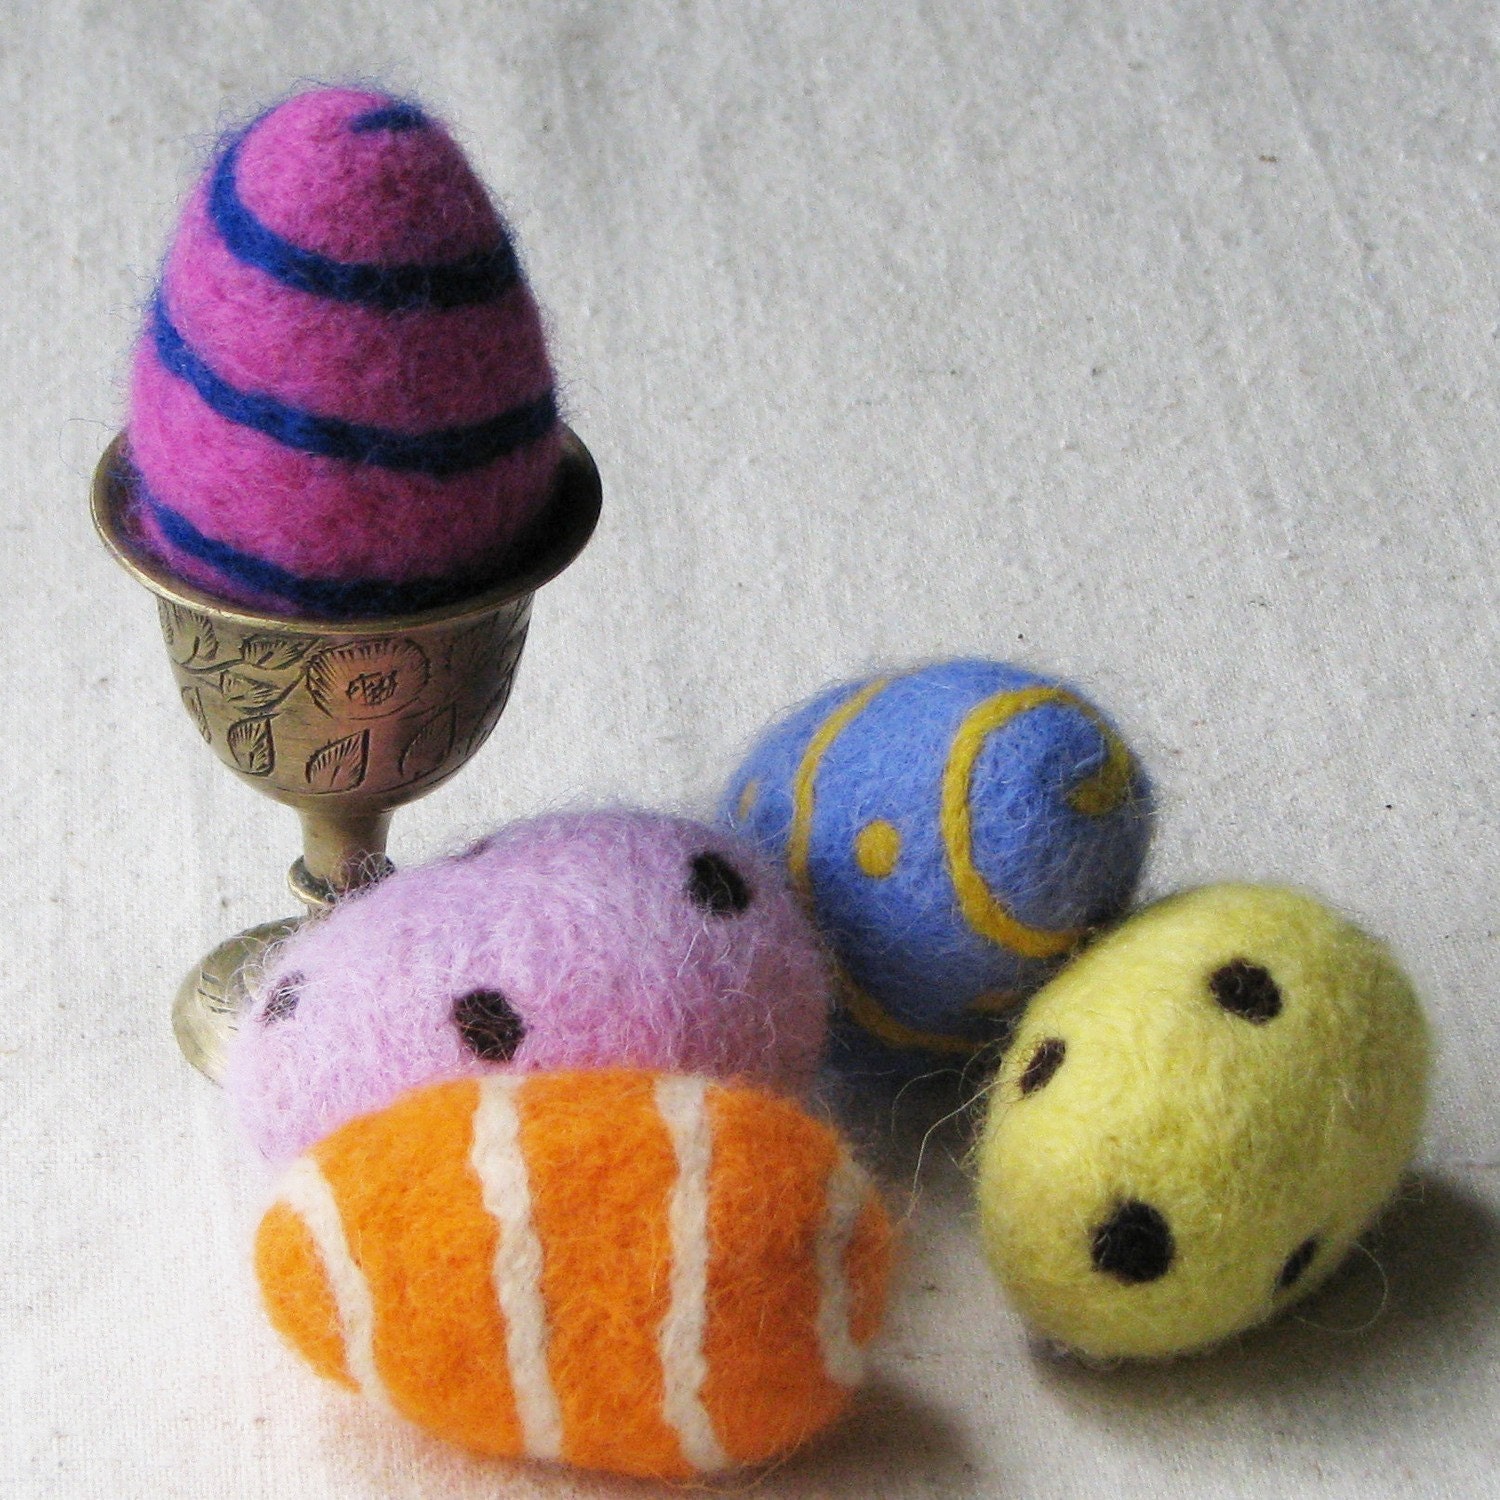 Easter eggs, needle felted from colorful wool in pink, yellow, orange, and blue, set of 5